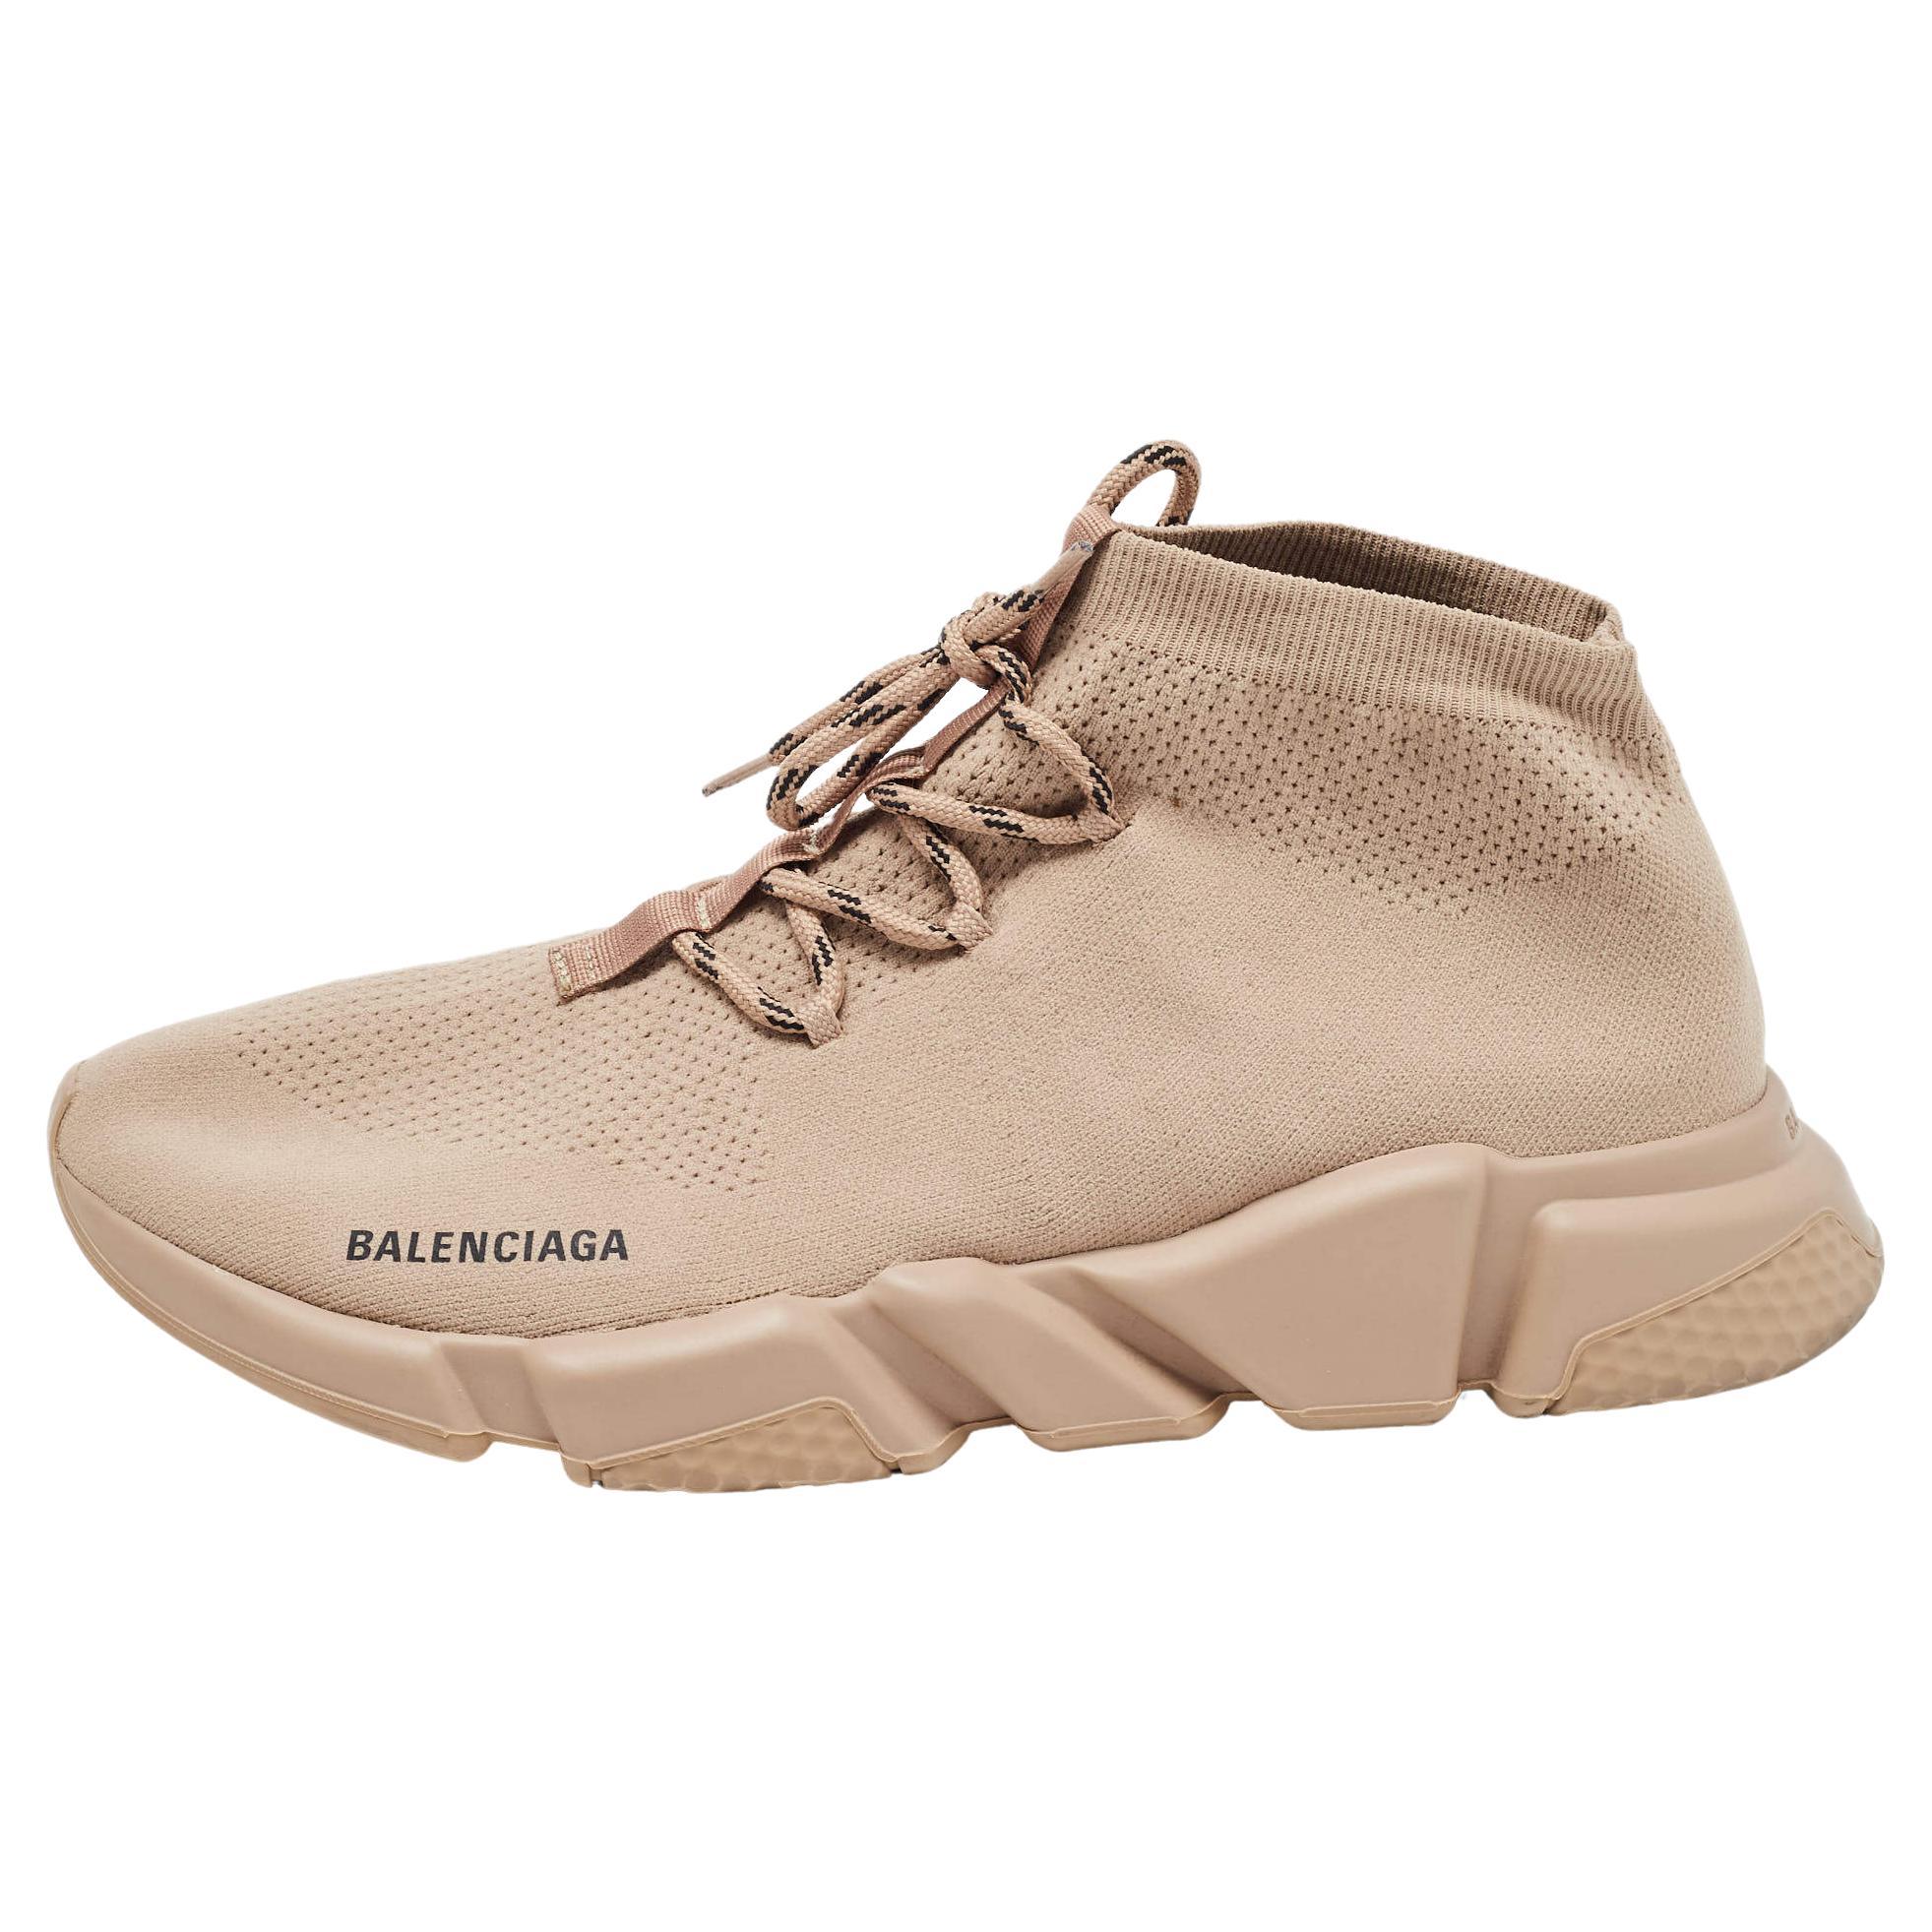 Balenciaga Beige Knit Fabric Speed Trainer Sneakers Size 46